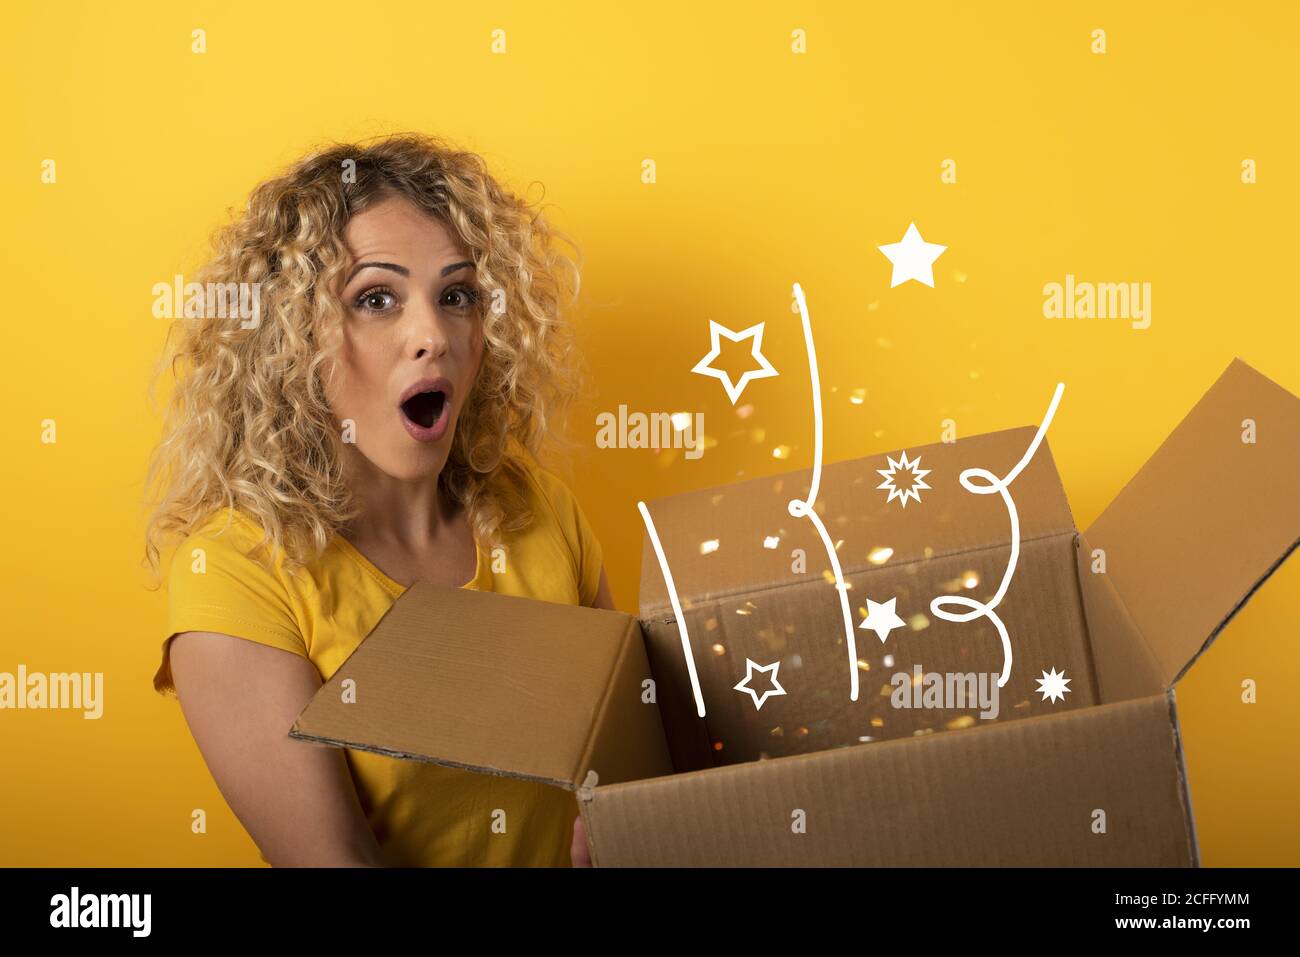 Happy girl receives a package from online shop order. Yellow background. Stock Photo